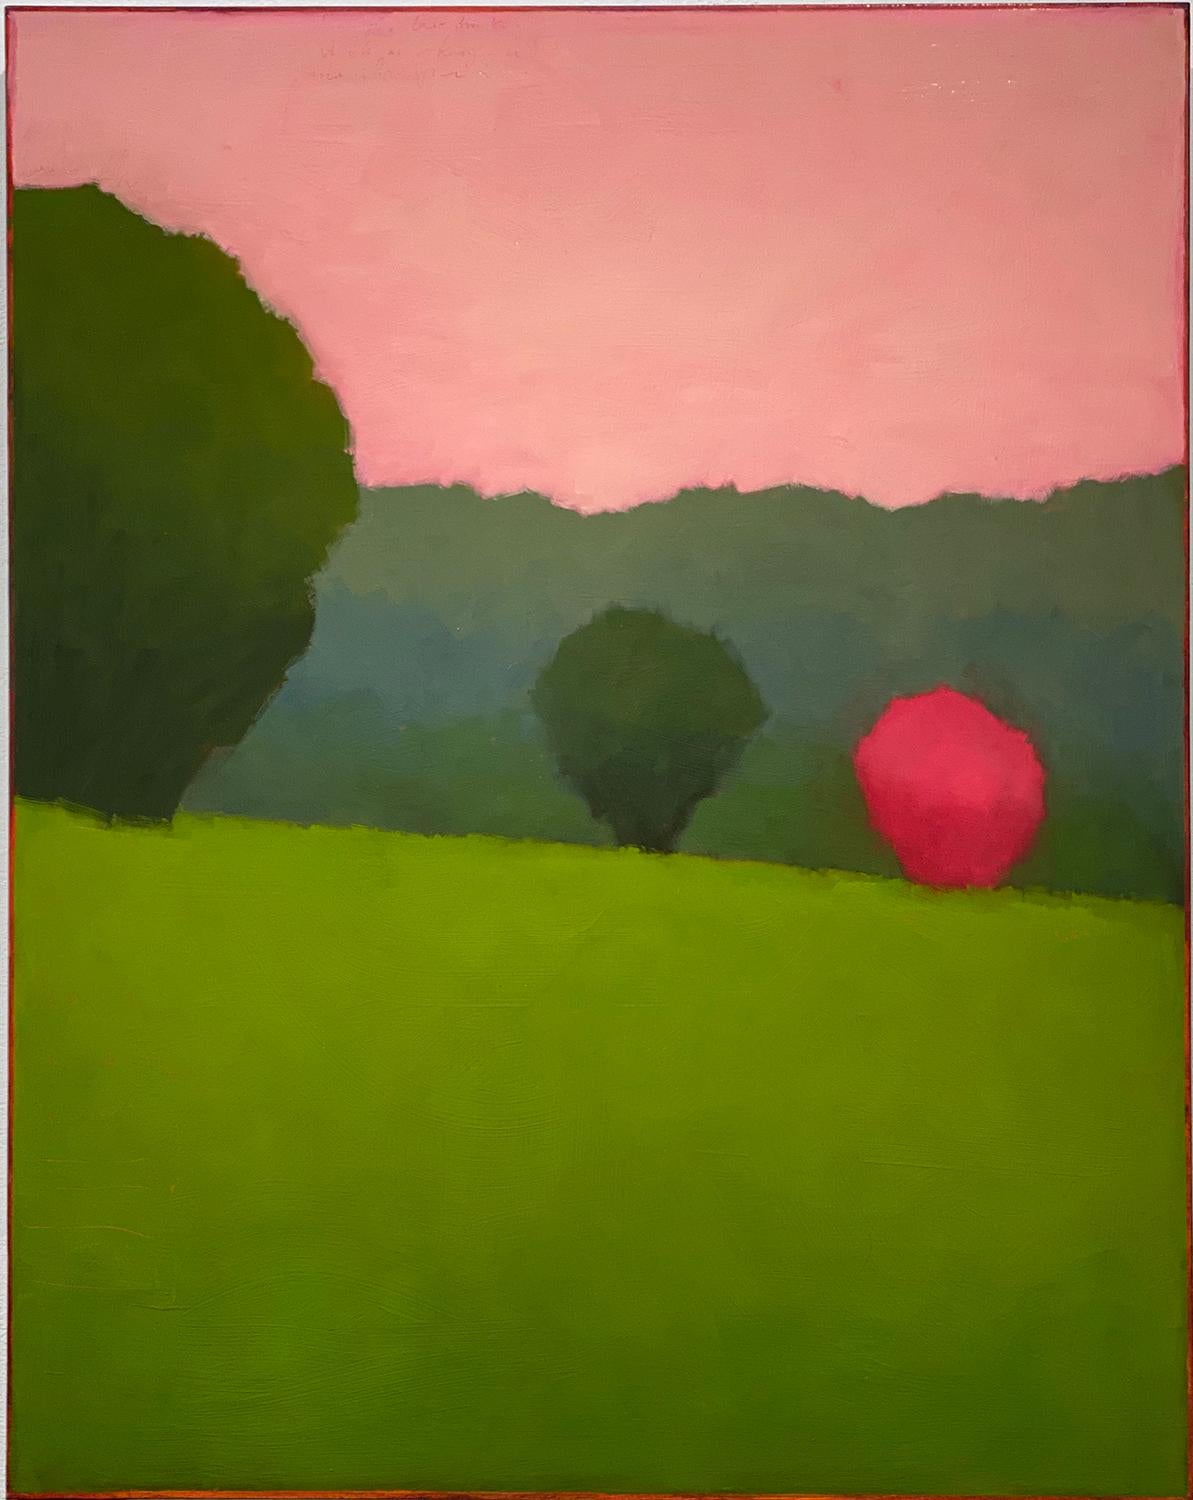 Spring Field (Vertical Color Field Landscape Painting in Pink and Green)
30 x 24 x 2 inches, oil on birch panel

Tracy Helgeson plays on the idea of color field painting with rural landscapes saturated in improbable hues. Helgeson literalizes the